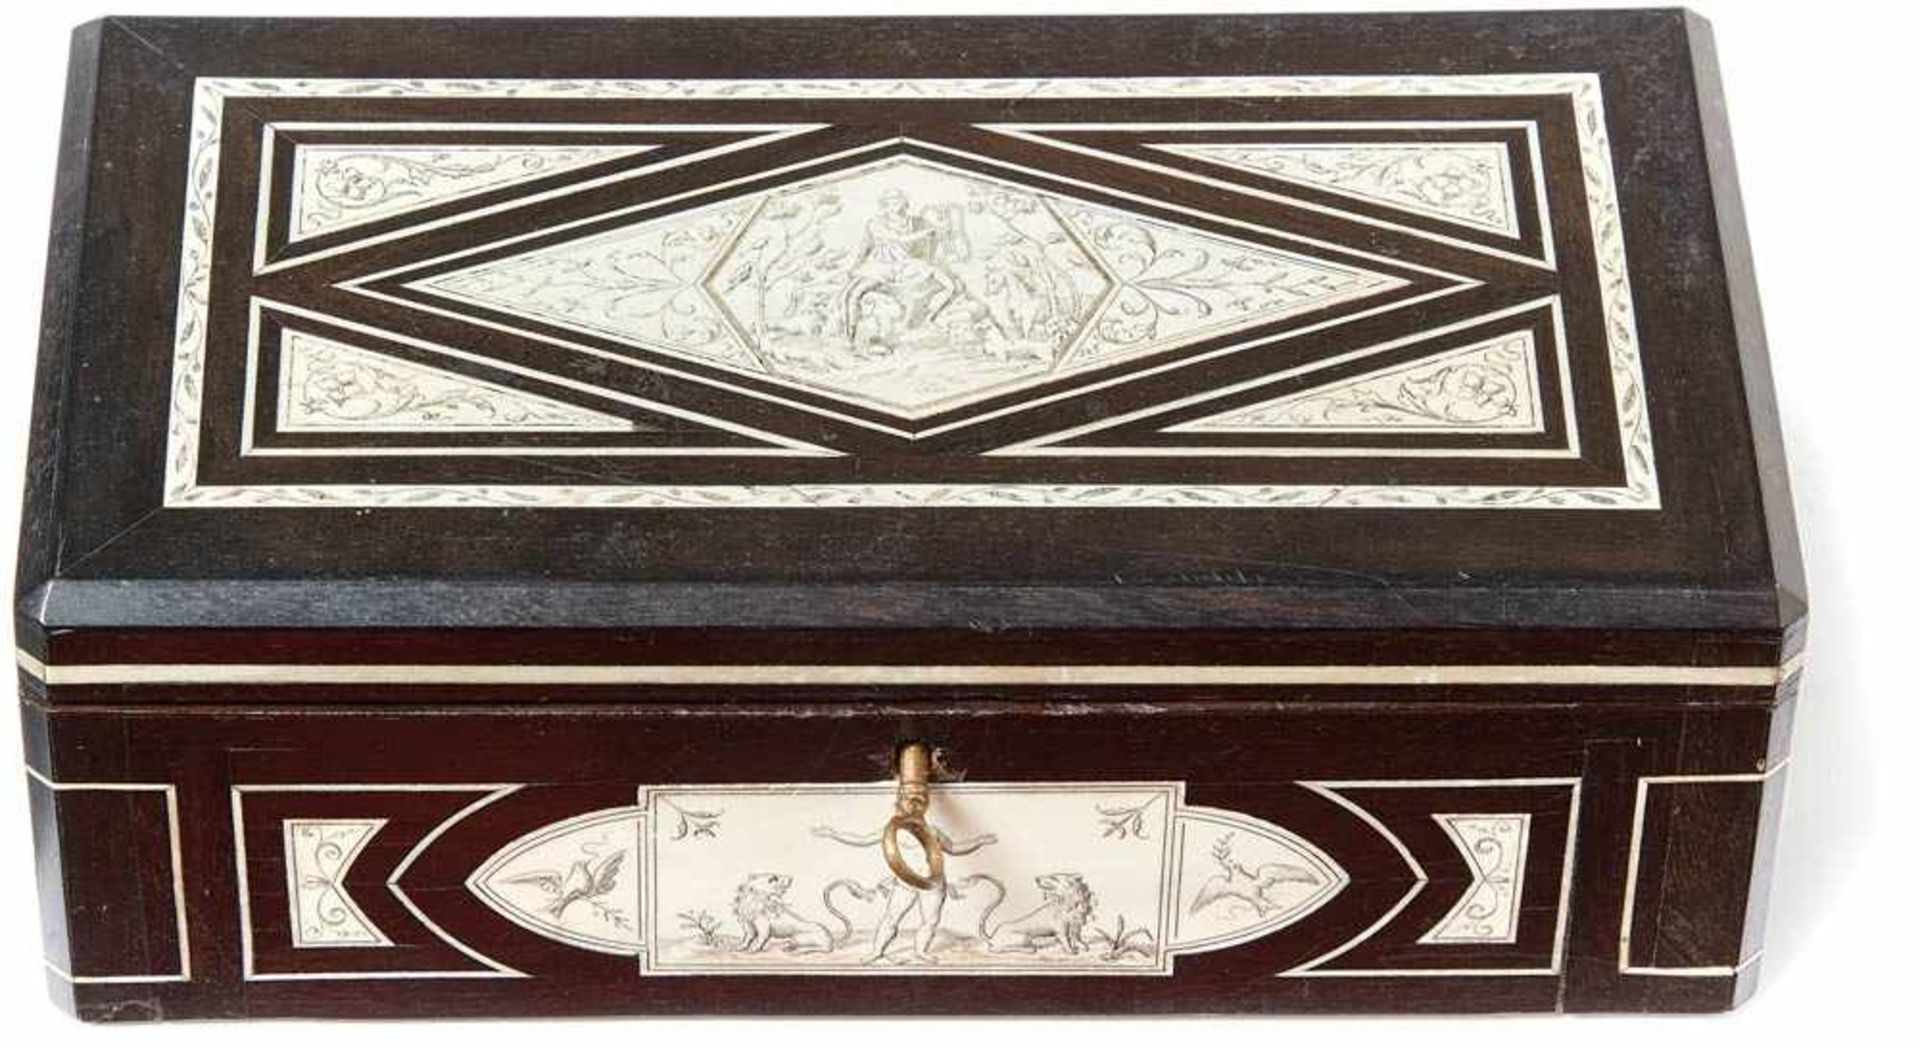 Small casketItaly, early 19th centuryRectangular corpus, ribbon inlays on all sides and picture